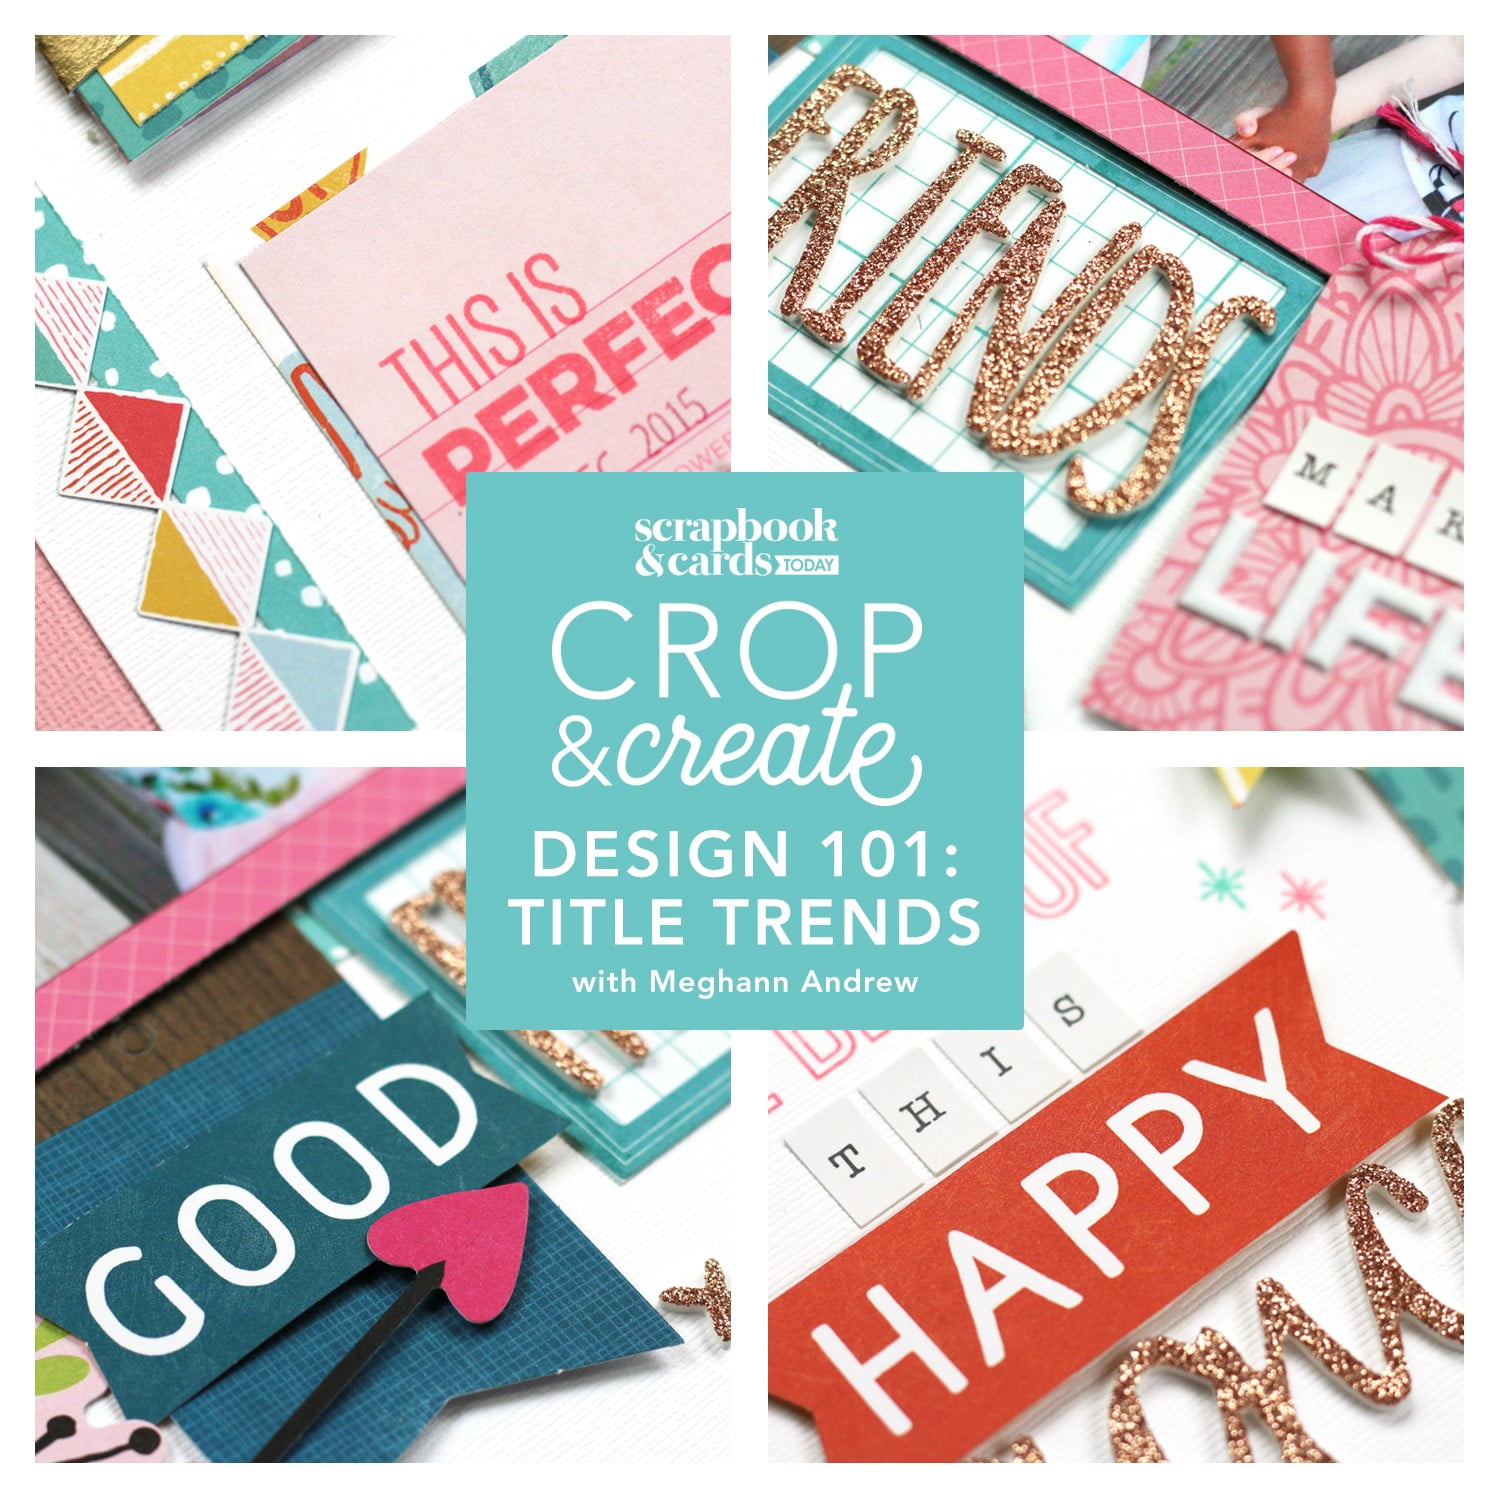 Design 101: Title Trends with Meghann Andrew